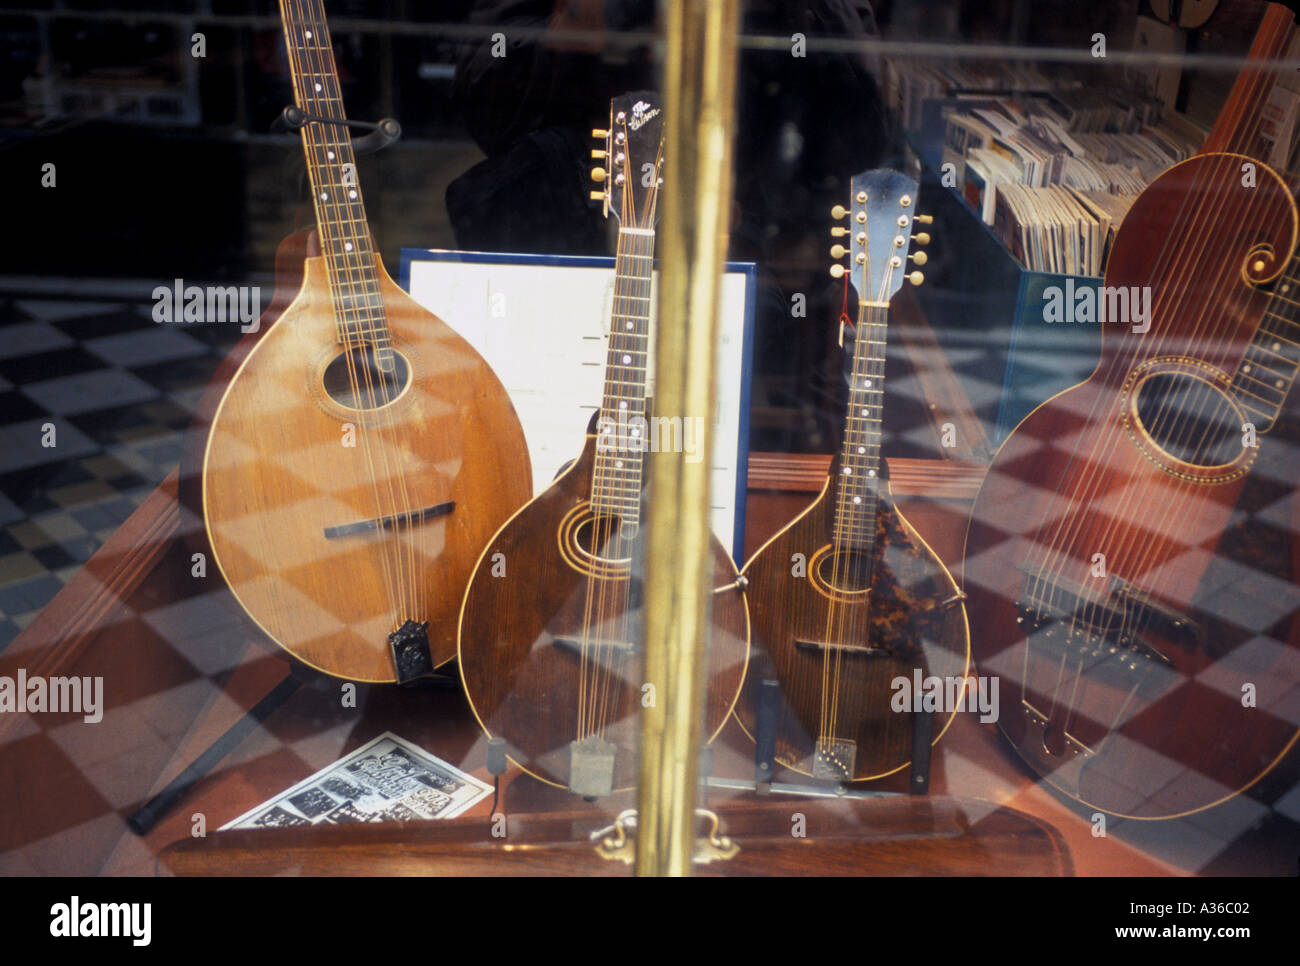 Stringed instruments in music shop window Stock Photo